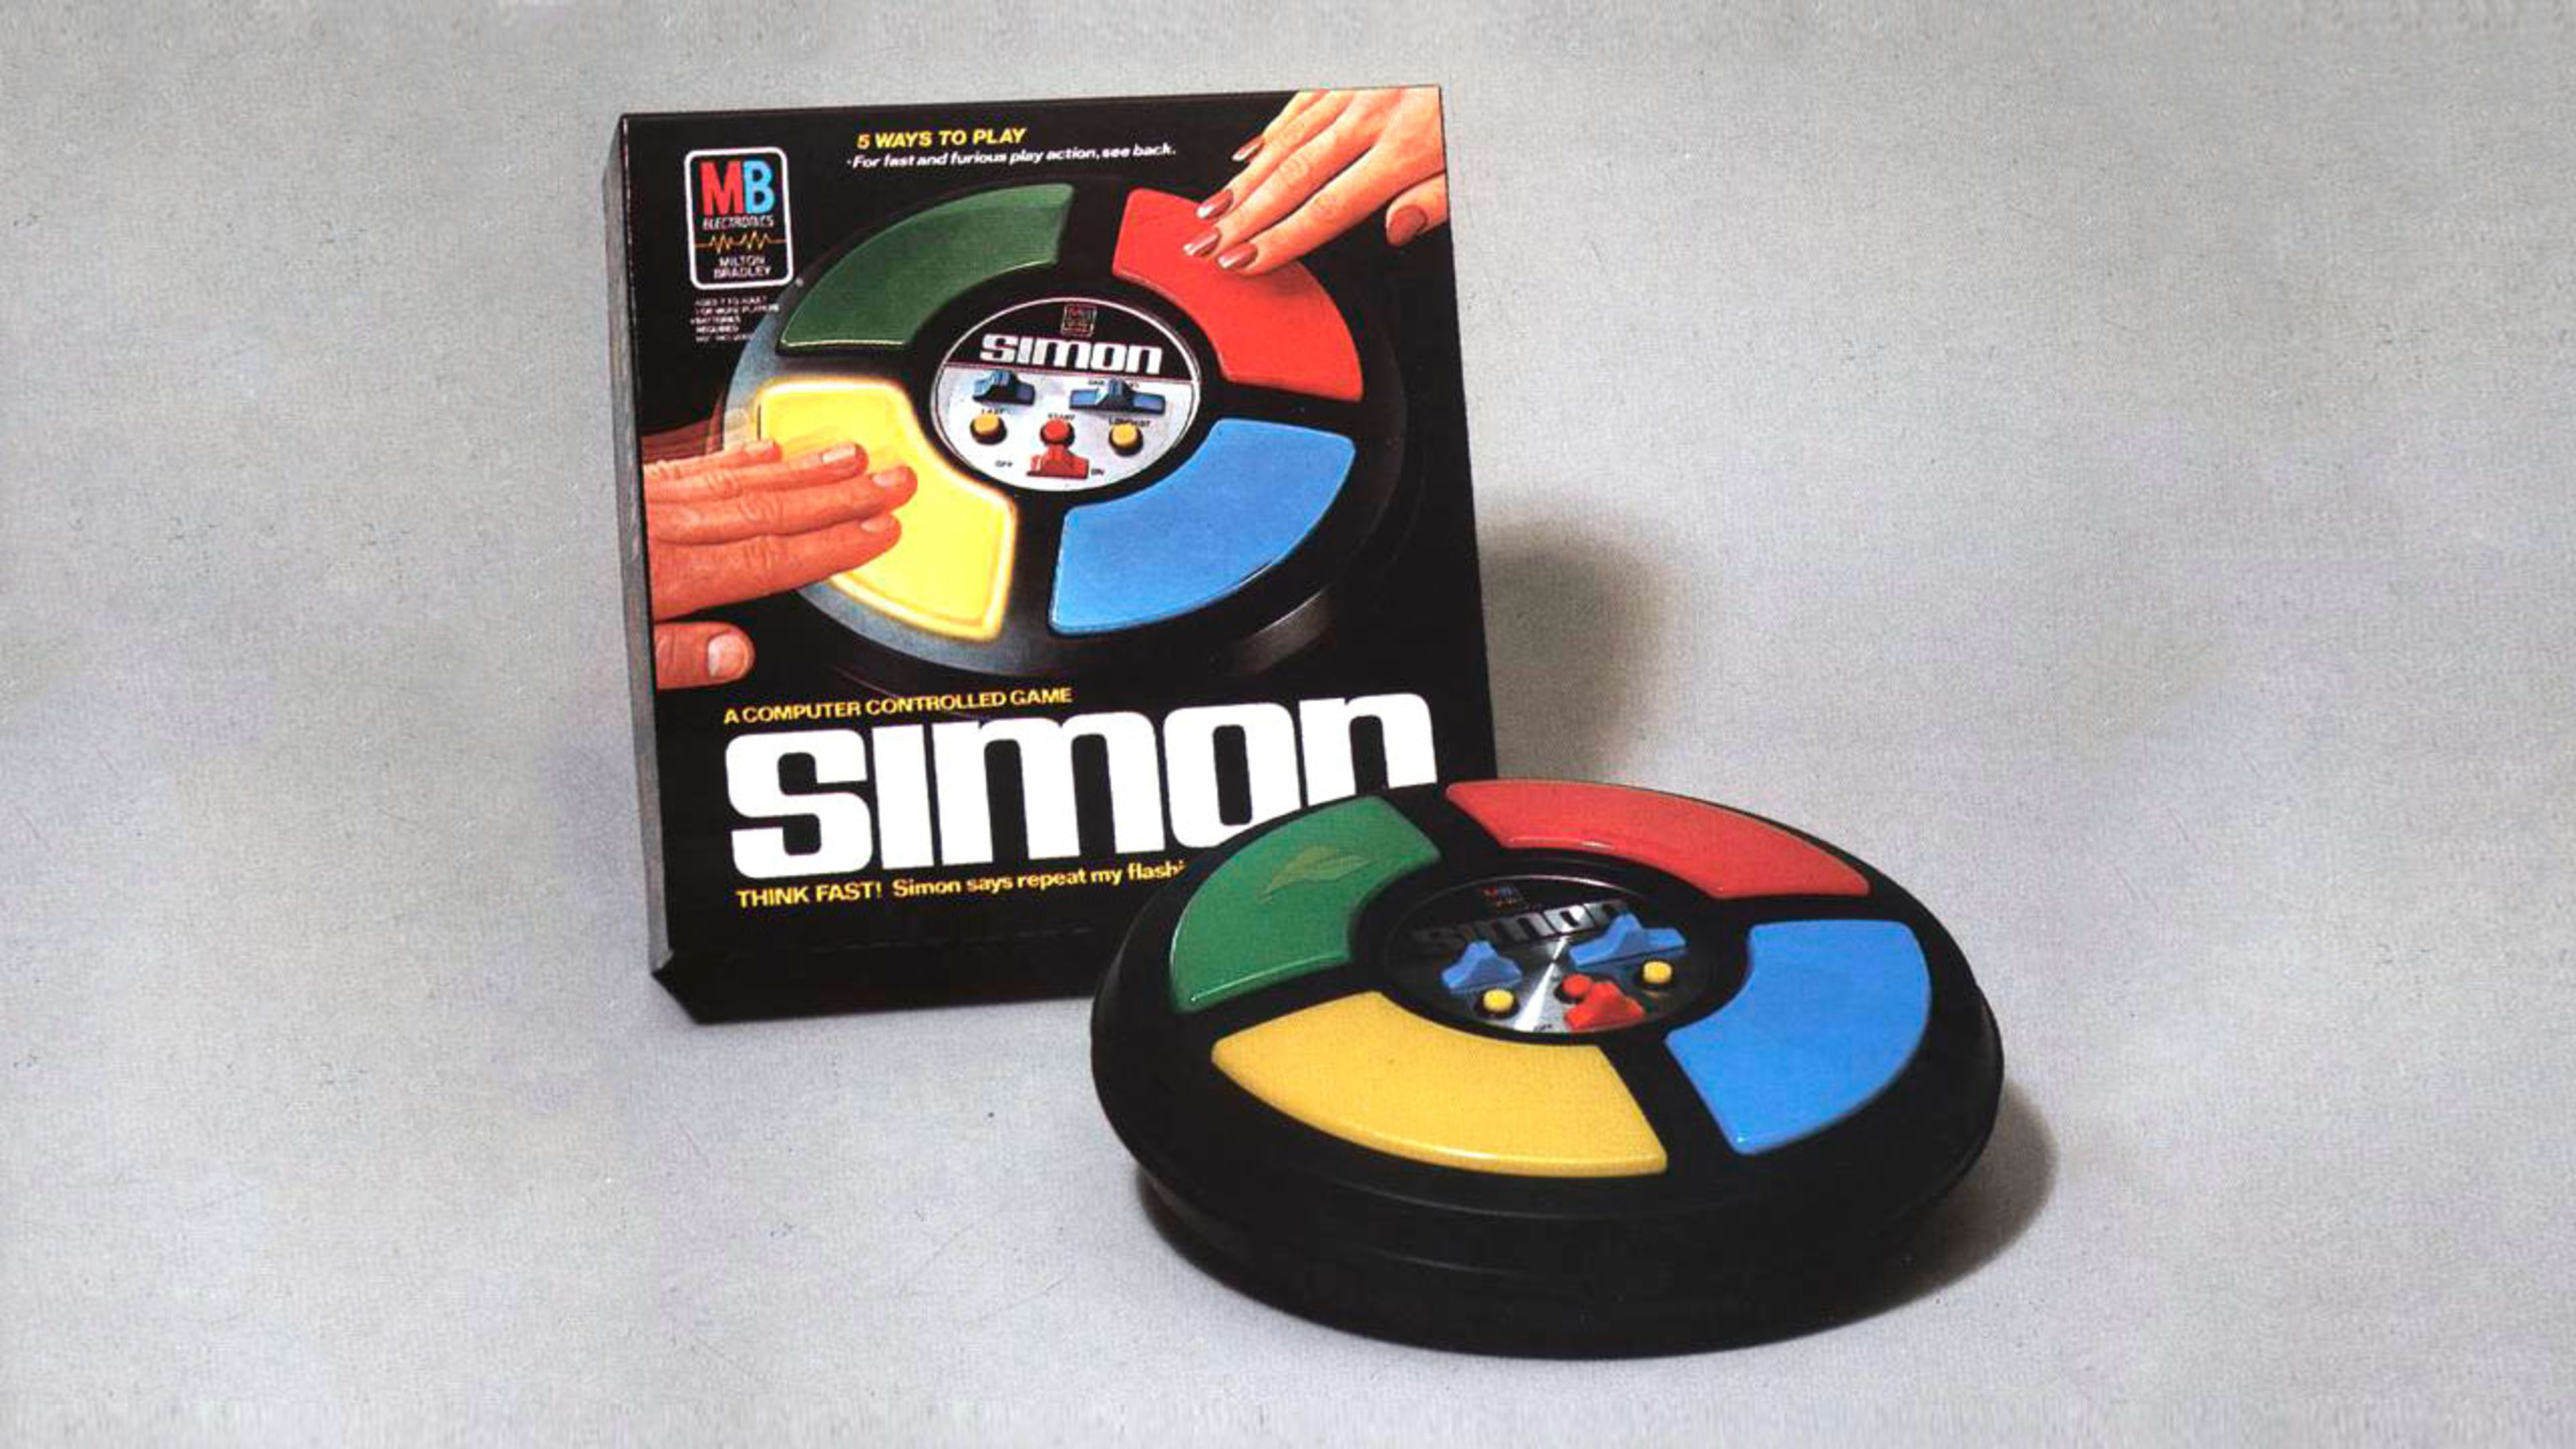 40 Years Of Simon, The Electronic Game That Never Stops Reinventing Itself